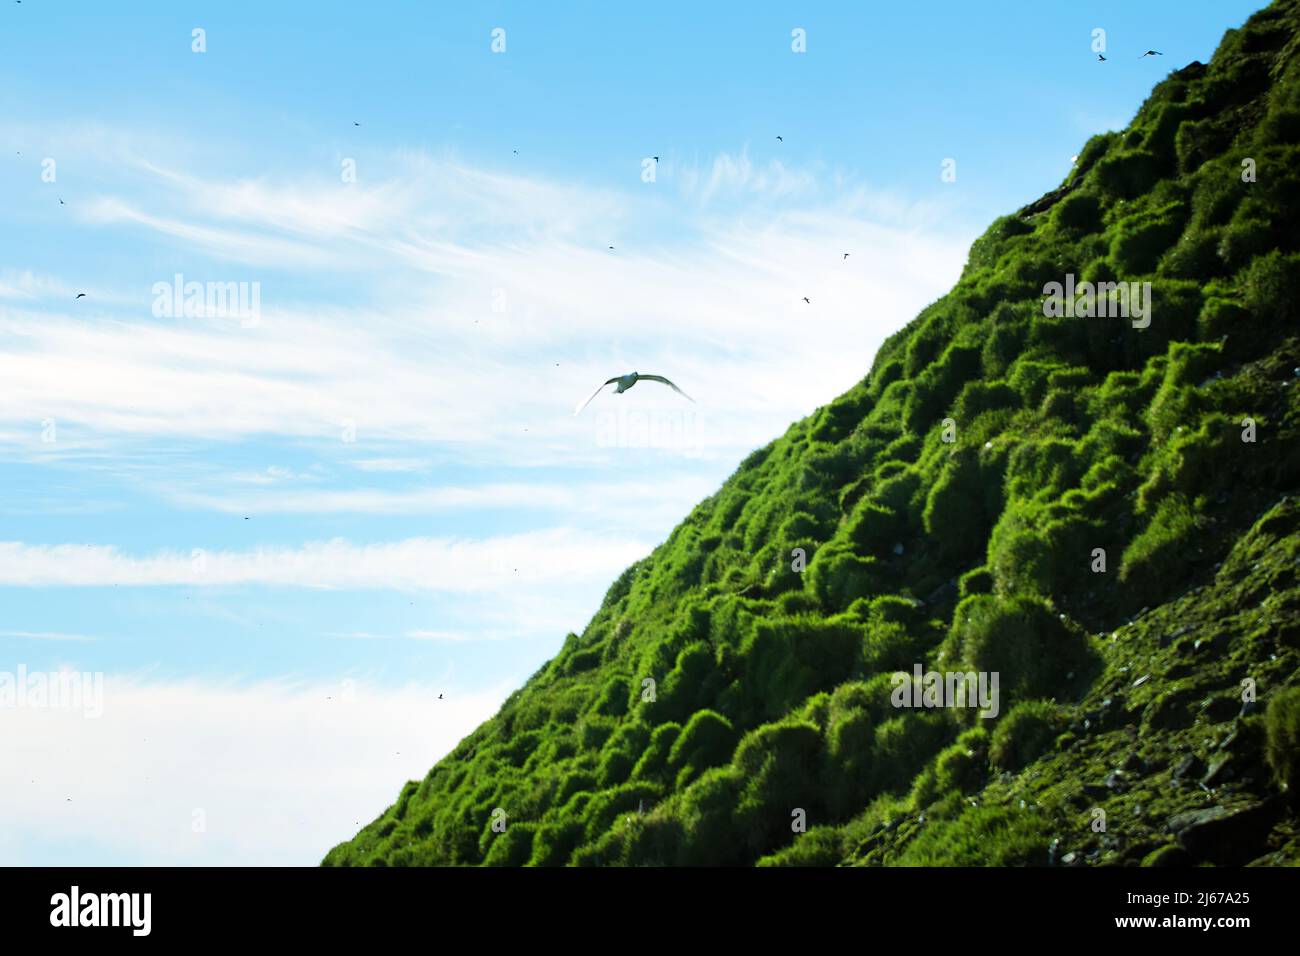 Guano (droppings of seabirds) is best fertilizer, chinchas. Lush meadows formed by colony of sea birds due to abundance of guano (nitrogenous guano), Stock Photo